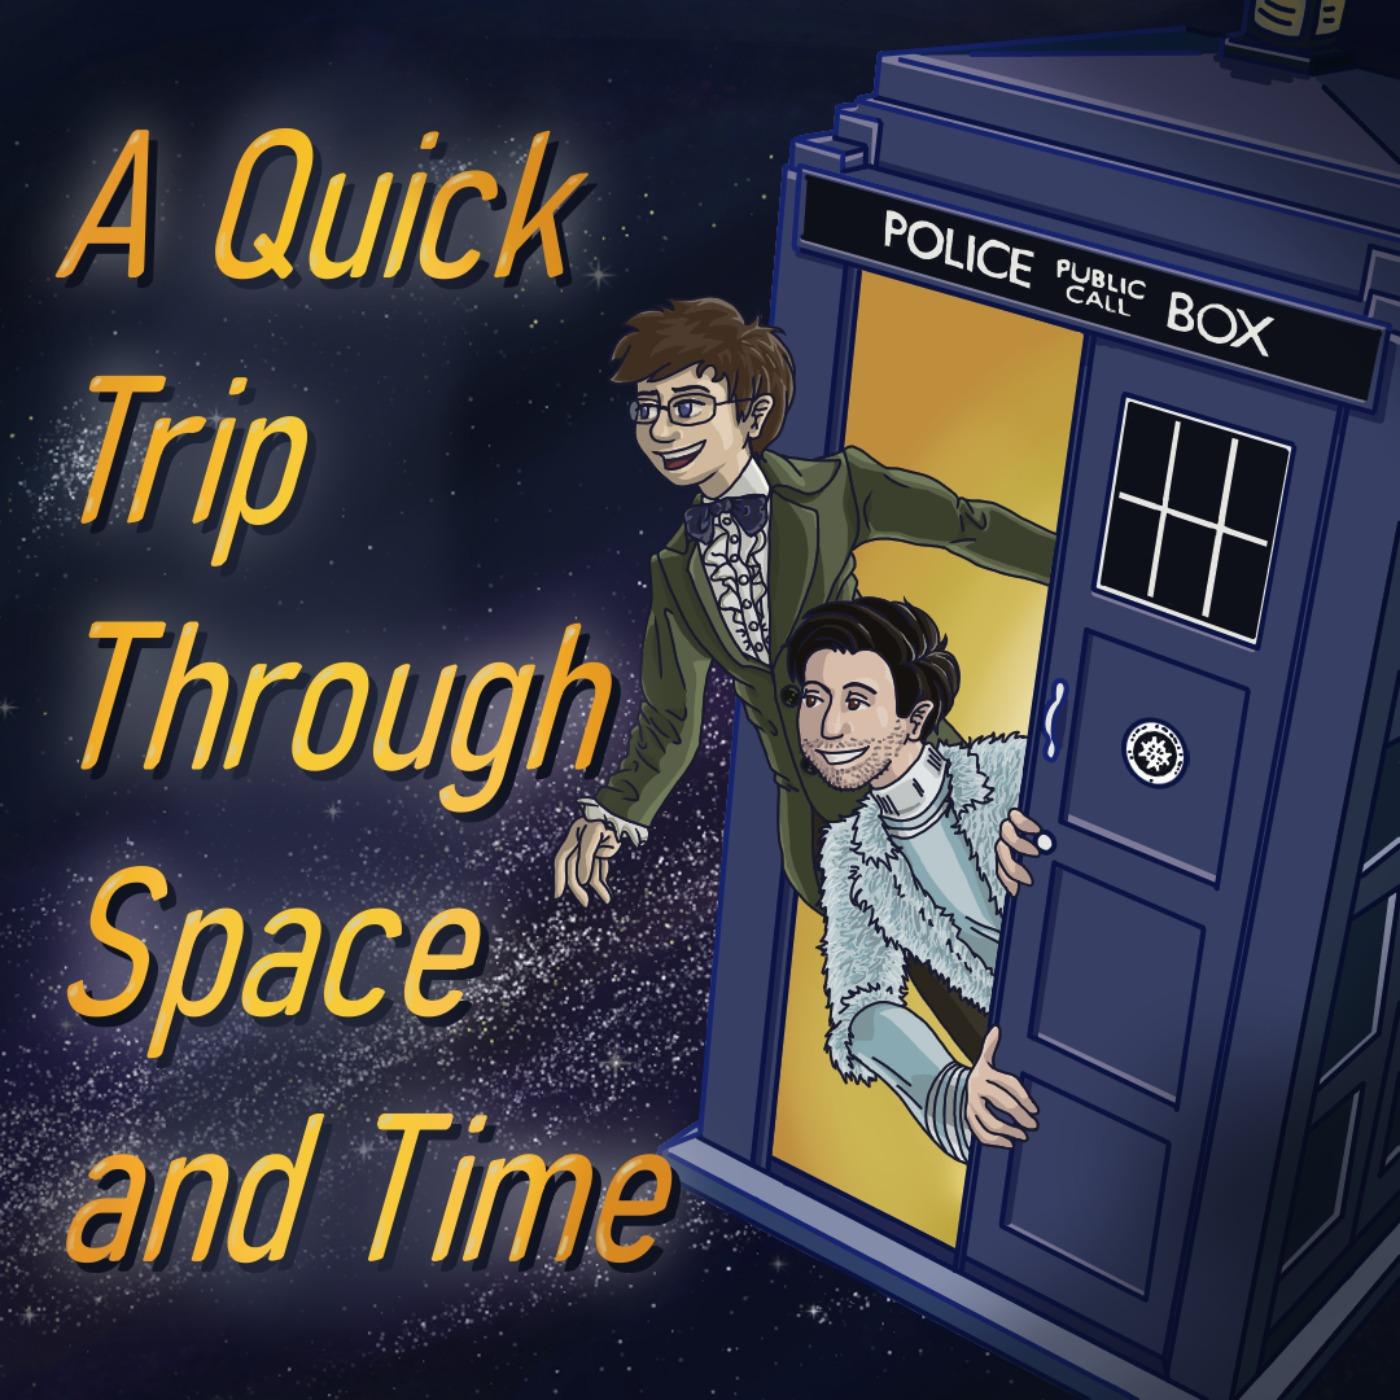 A Quick Trip Through Space and Time